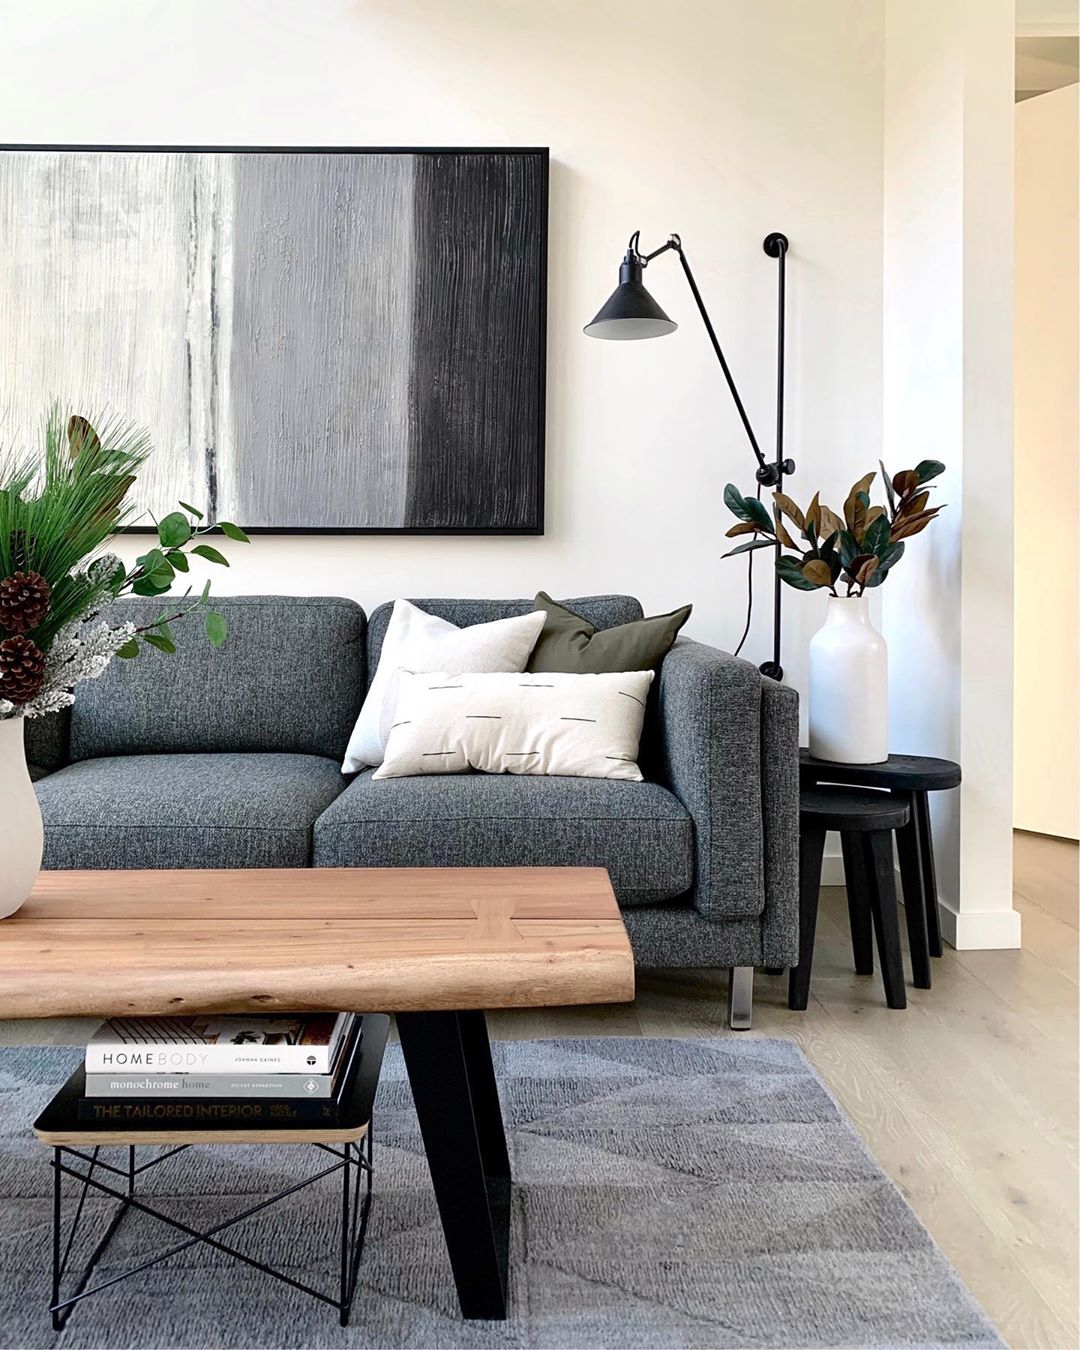 Dark gray couch and wood table in white-painted living room. Photo by Instagram user @simply.modern.living